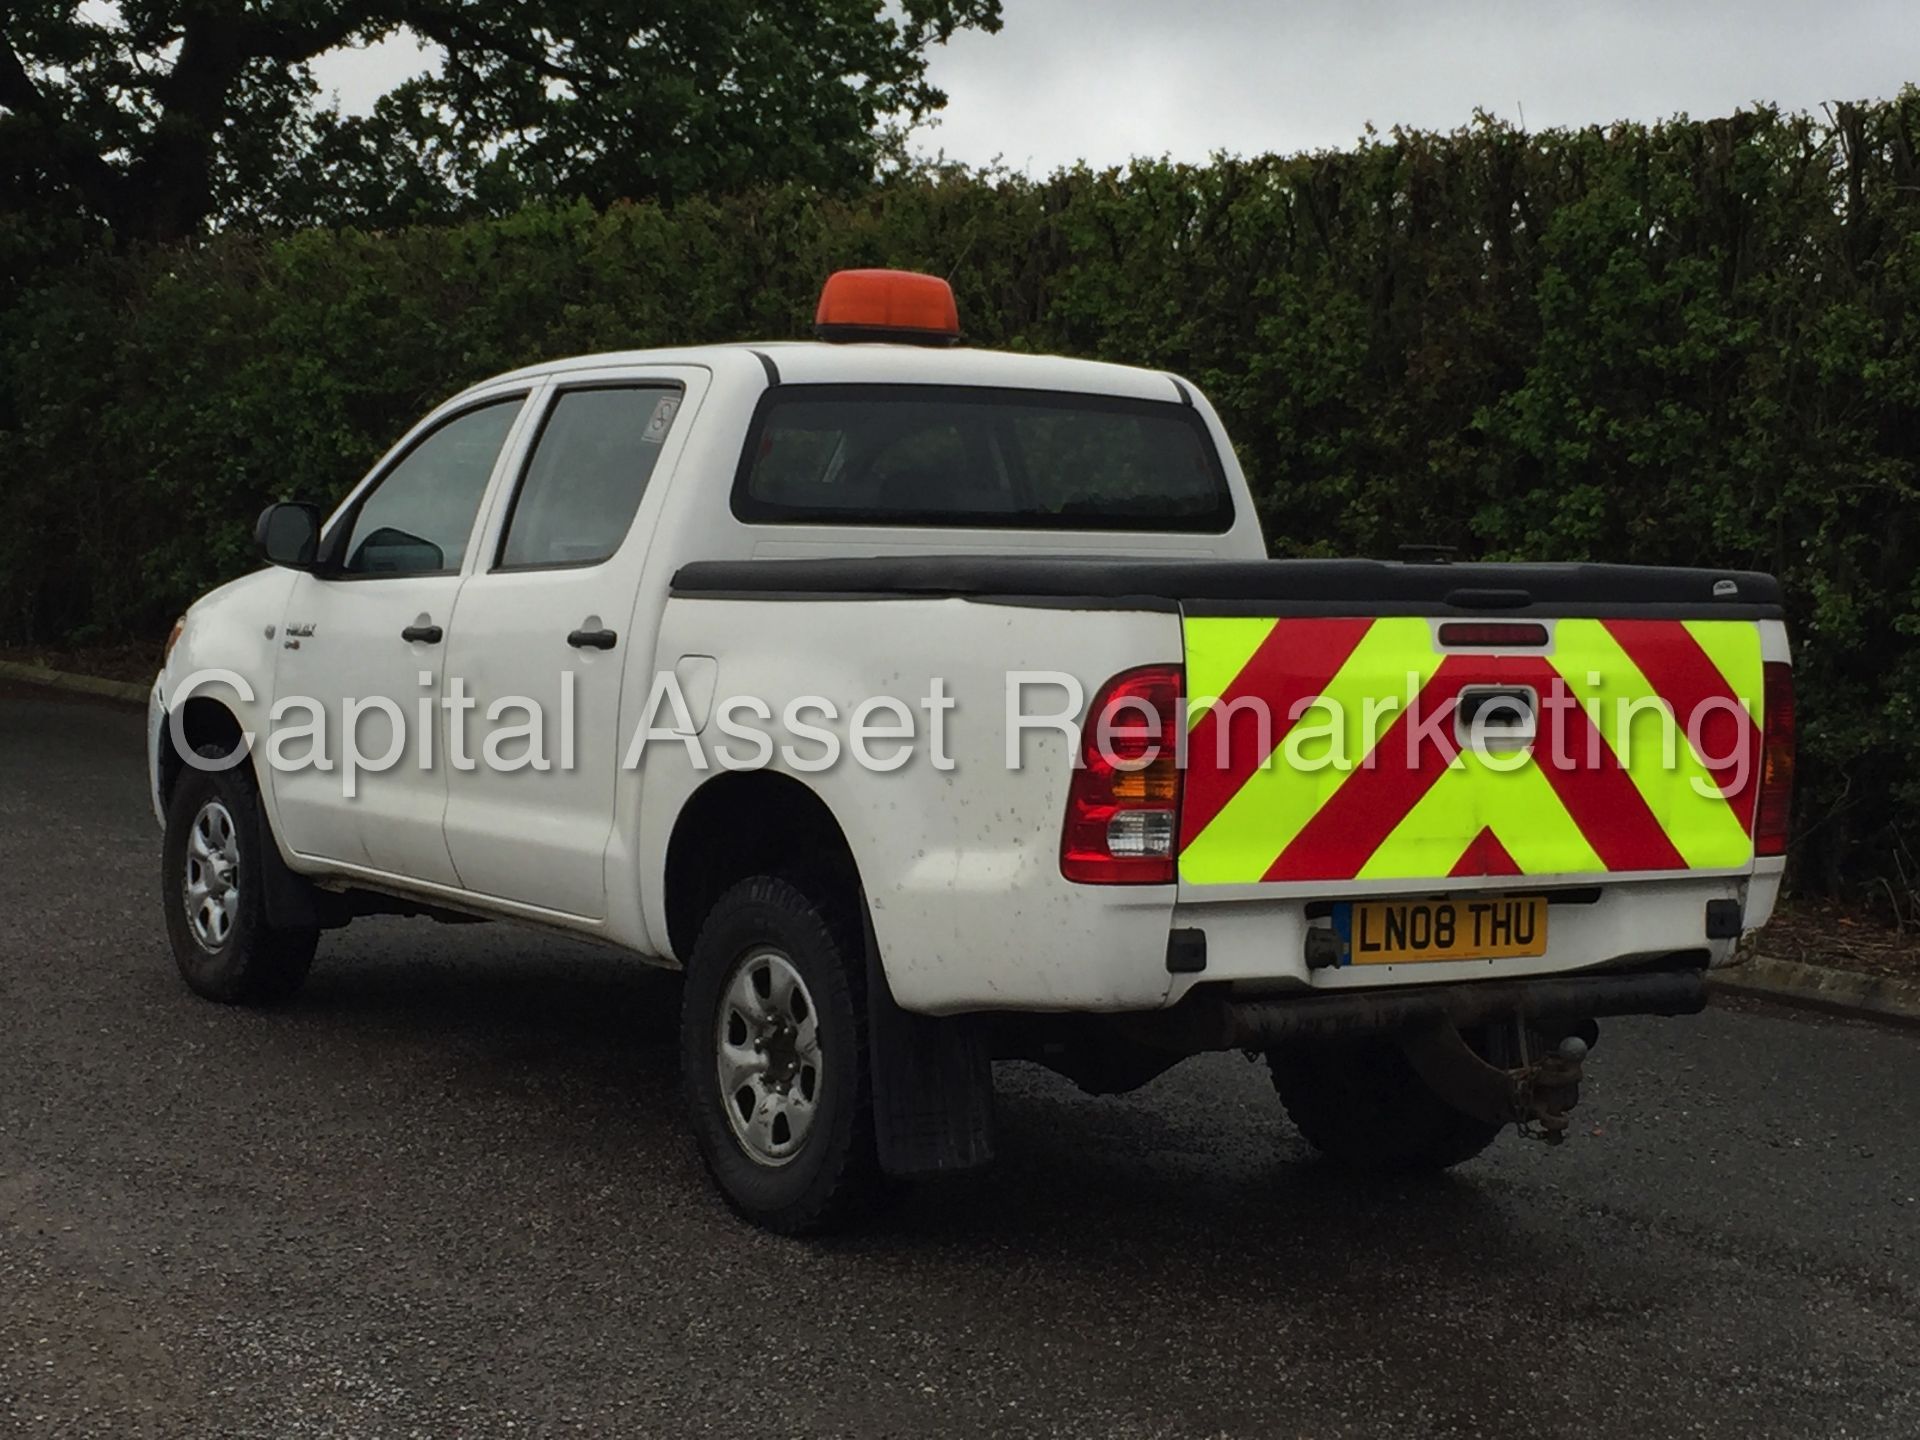 TOYOTA HILUX D-4D '171 BHP' (2008 - 08 REG) DOUBLE CAB PICK-UP (1 OWNER FROM NEW) - Image 5 of 23